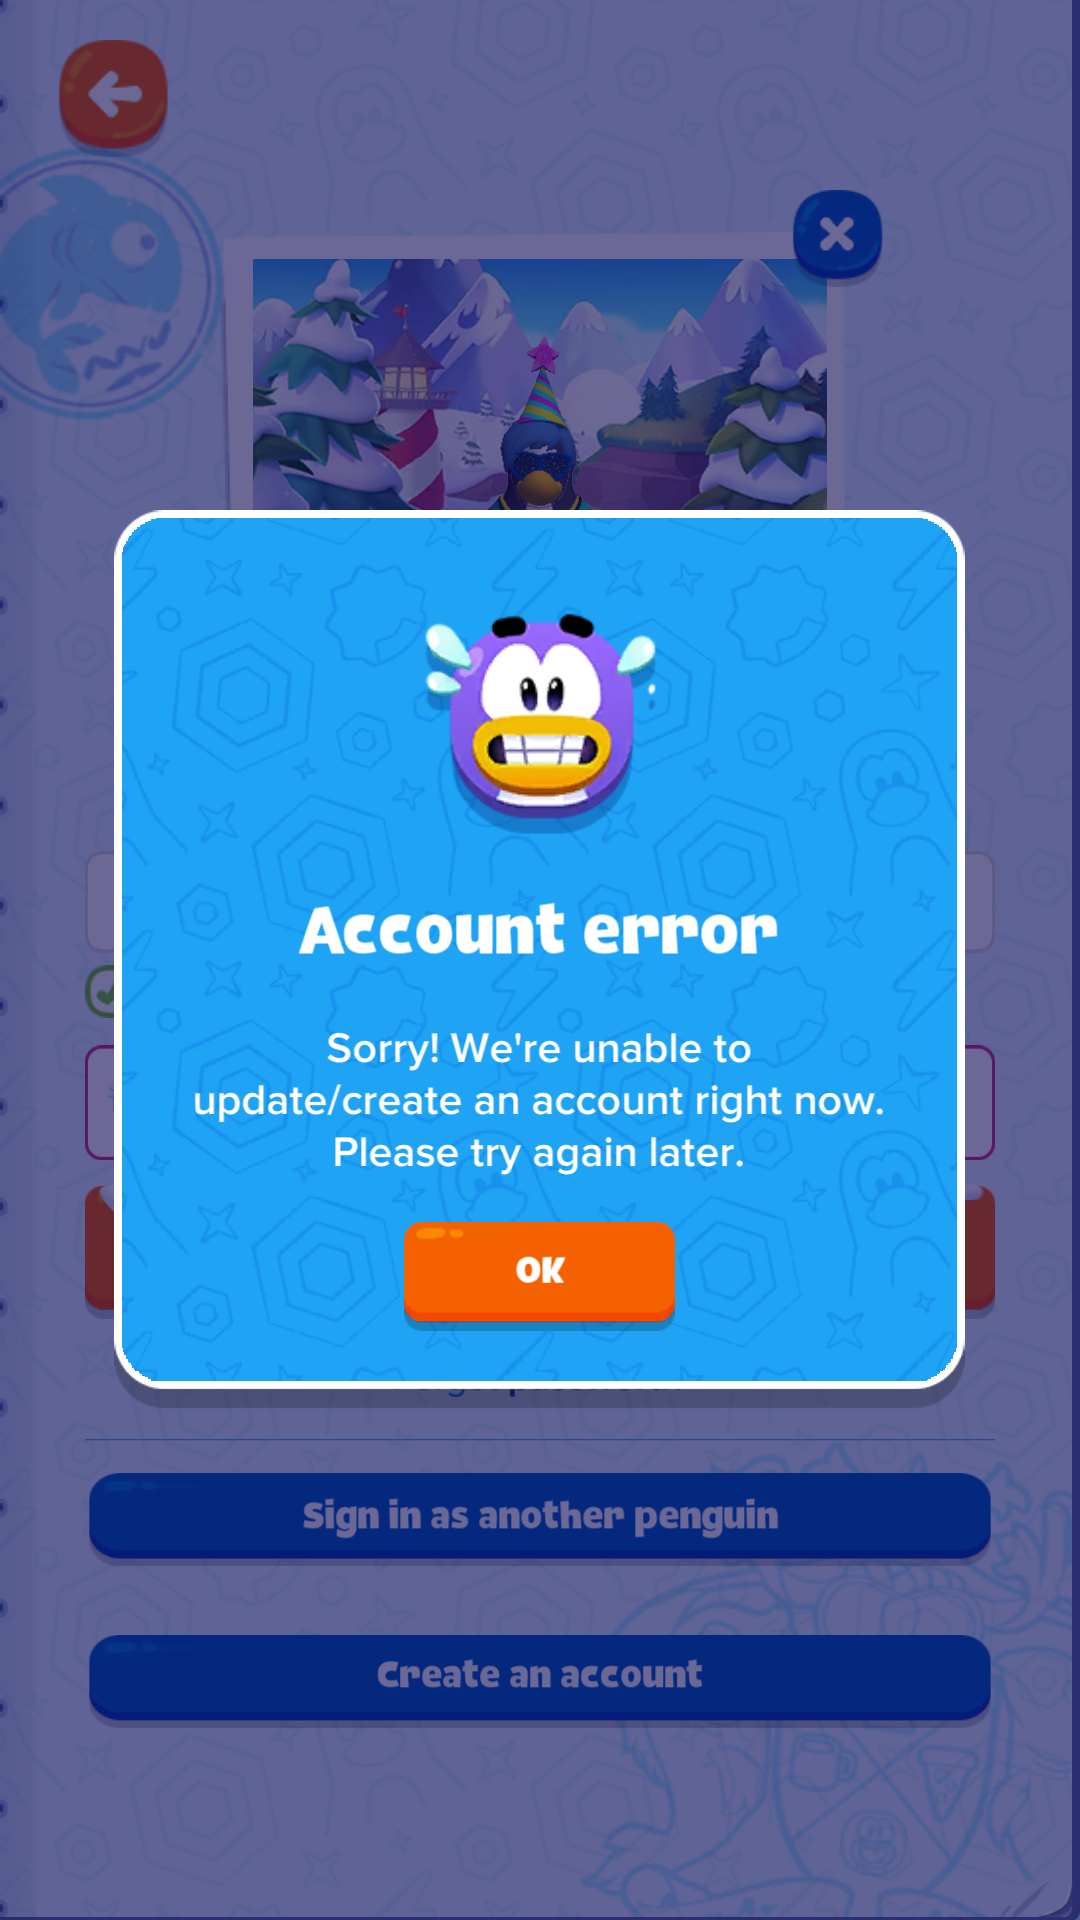 Sorry! We're unable to create/update accounts right now. Try again later.